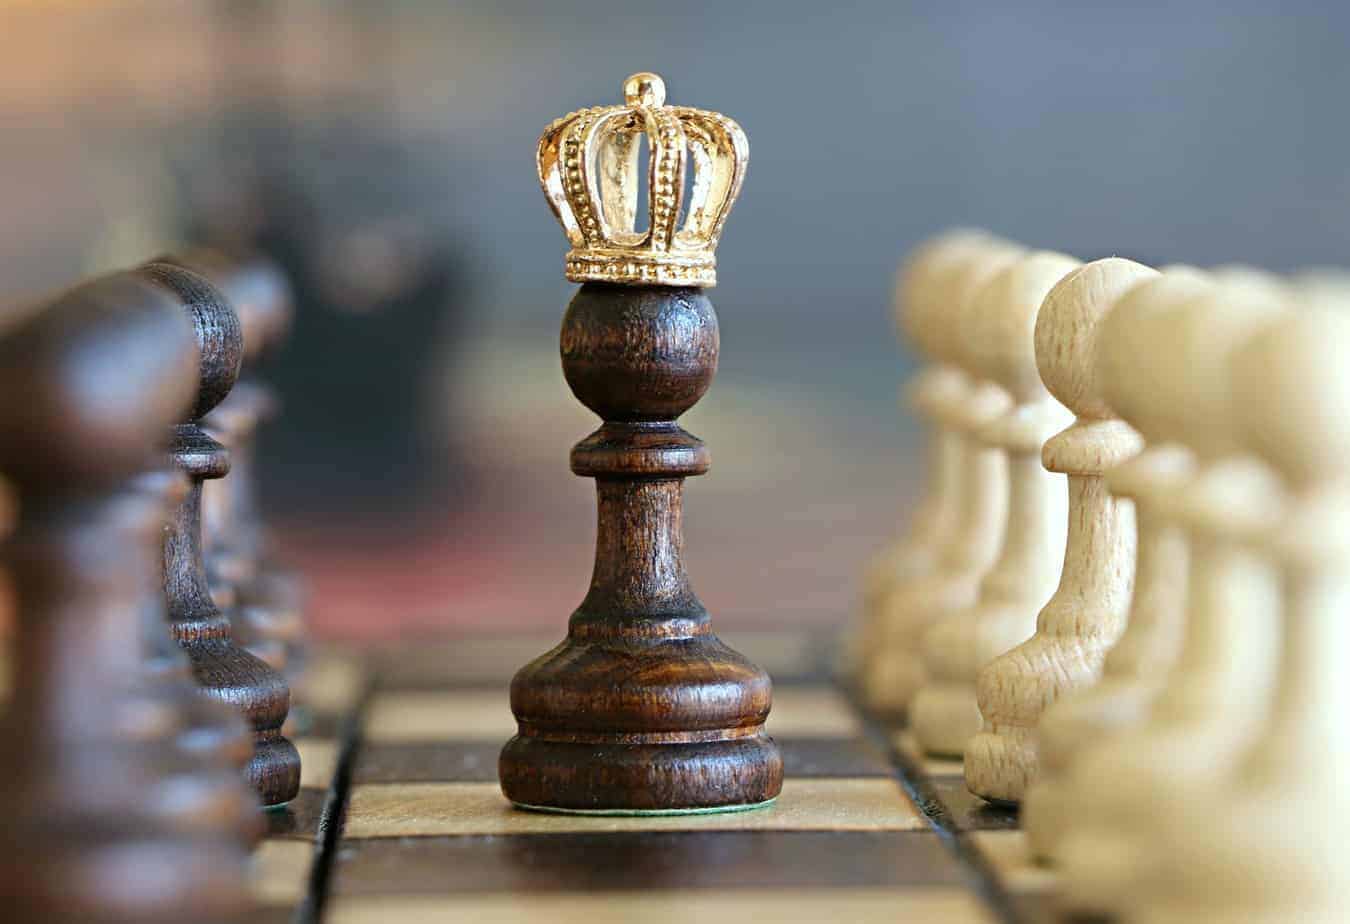 A pawn with a crown - humble beginnings leading to greatness